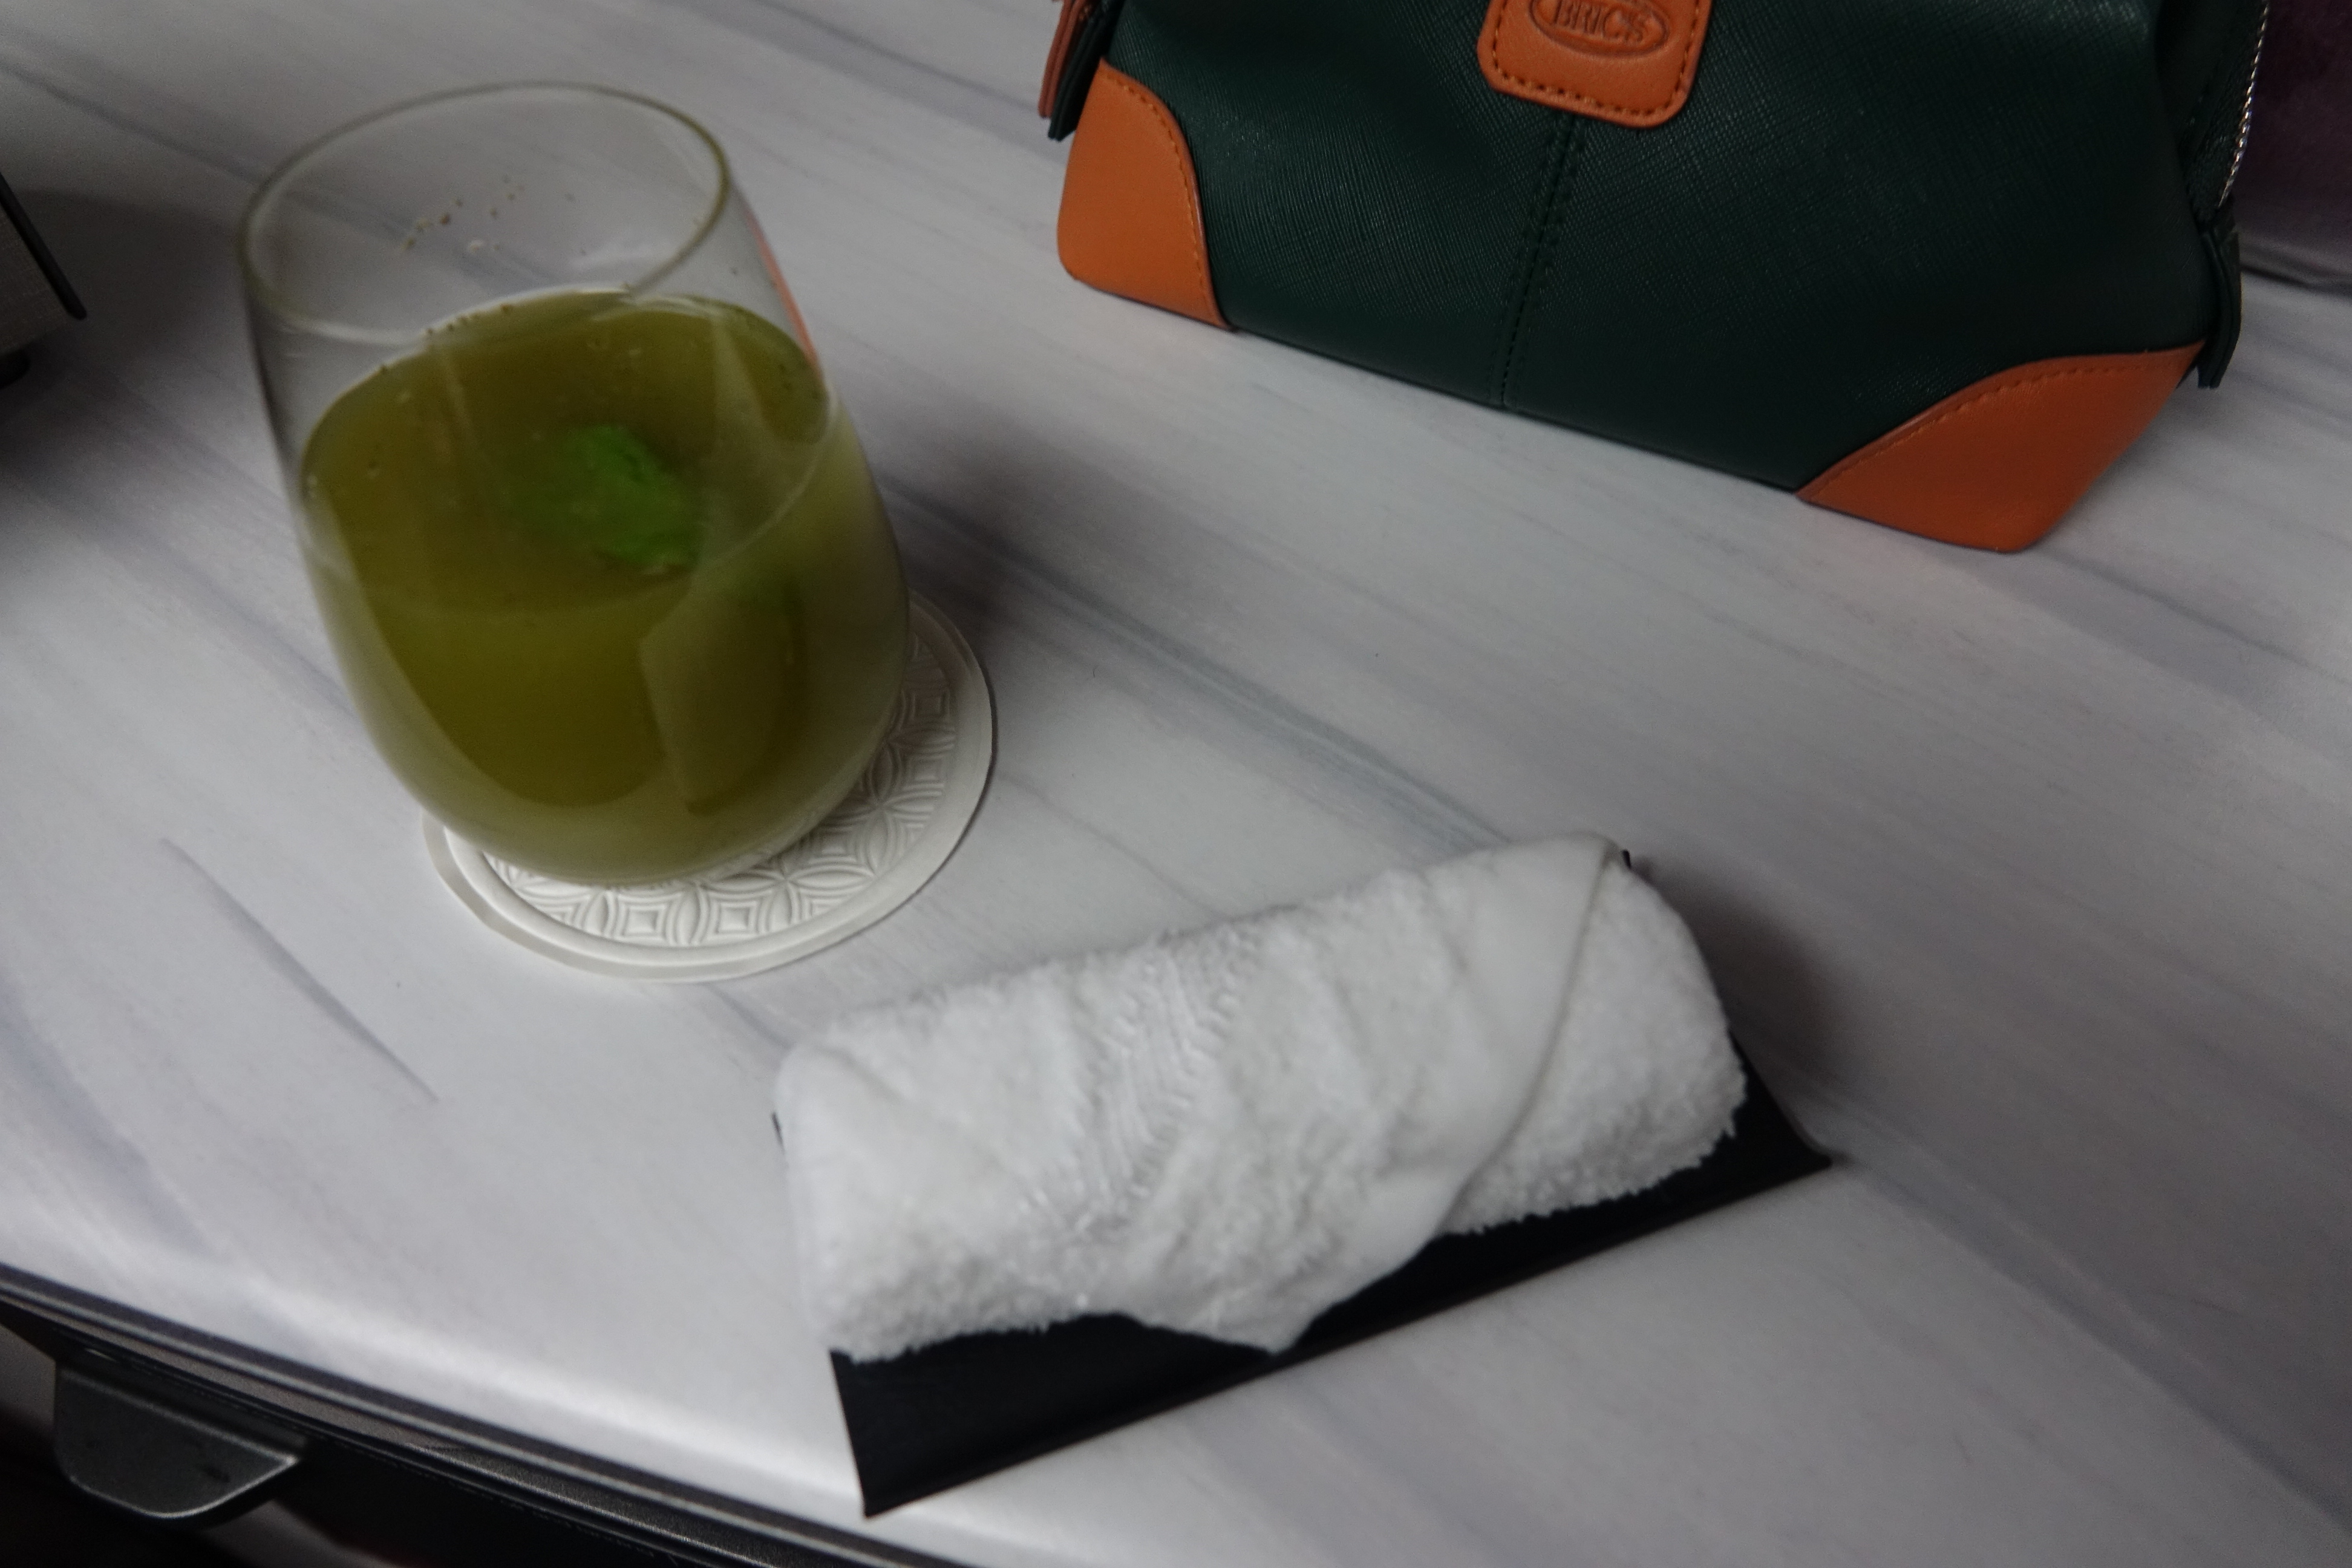 a towel on a plate next to a drink